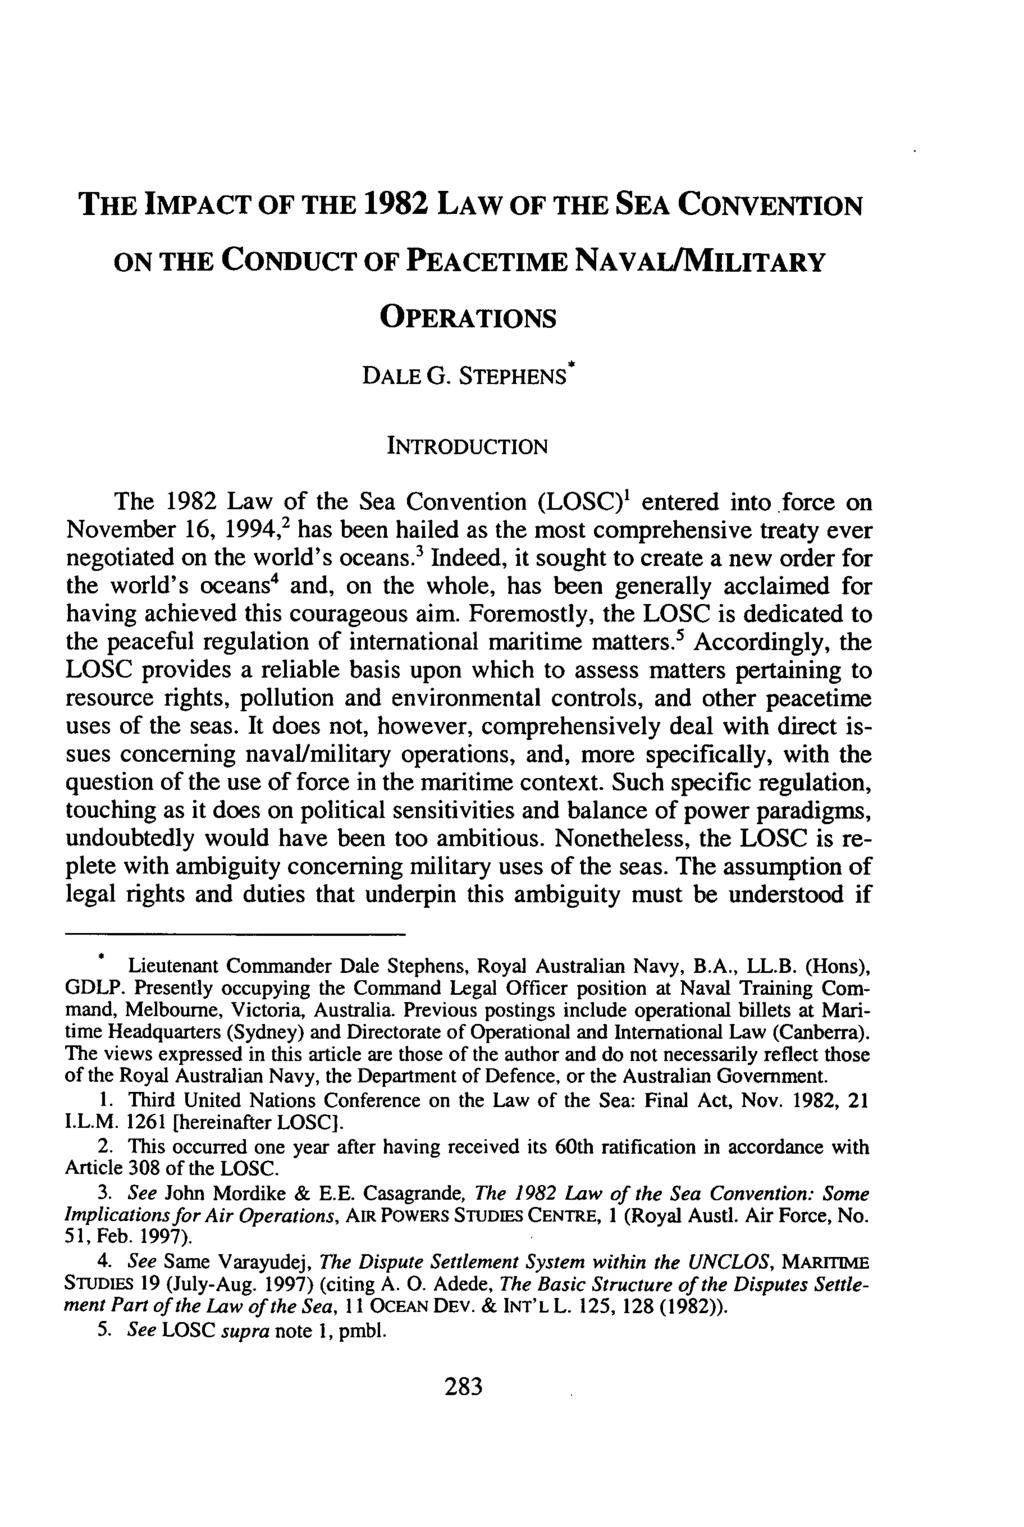 Stephens: The Impact of the 1982 Law of the Sea Convention on the Conduct o THE IMPACT OF THE 1982 LAW OF THE SEA CONVENTION ON THE CONDUCT OF PEACETIME NAVAL/MILITARY OPERATIONS DALE G.